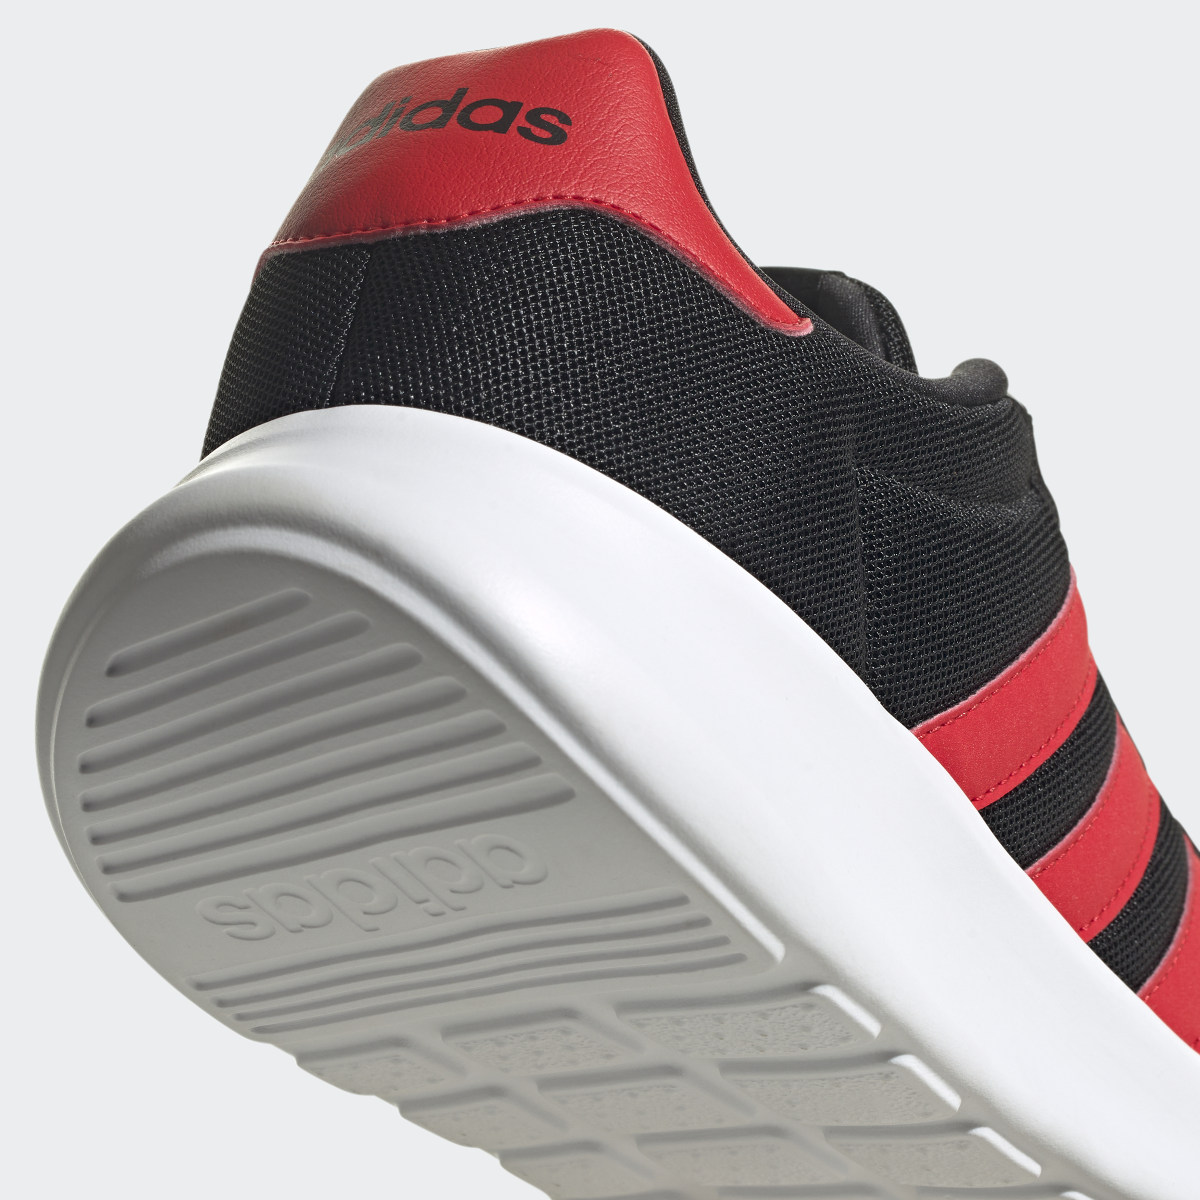 Adidas Lite Racer 3.0 Shoes. 9